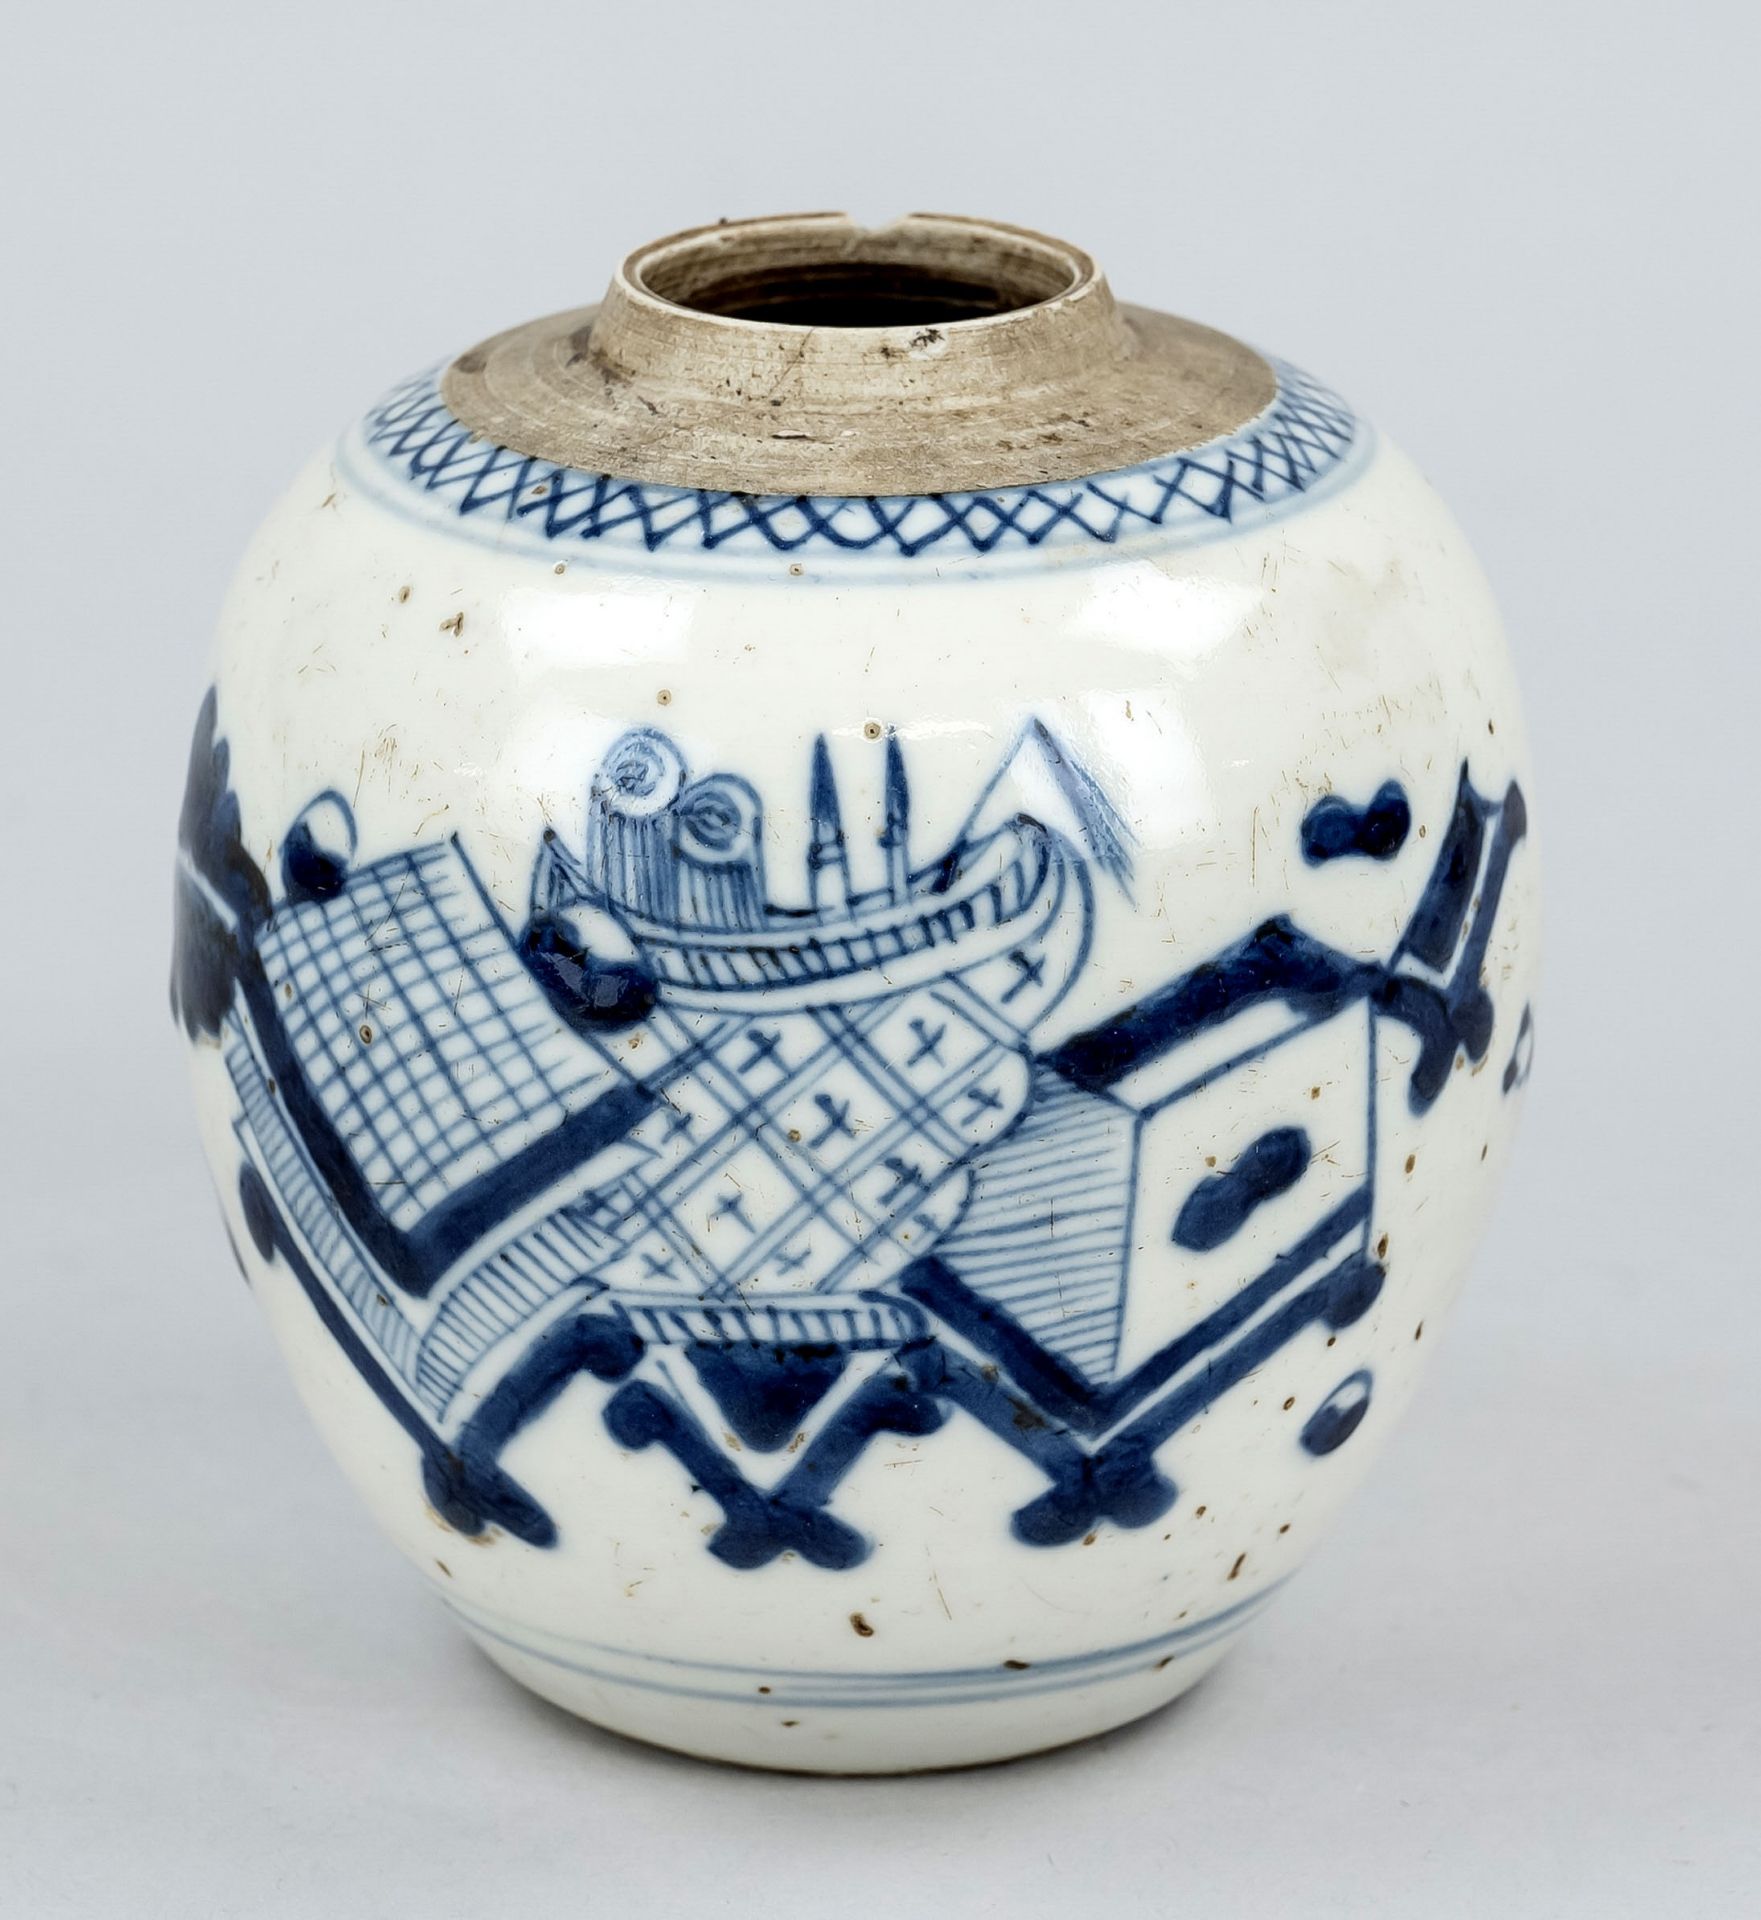 Small ginger pot, China, Qing dynasty(1644-1911), 19th century, porcelain with cobalt blue